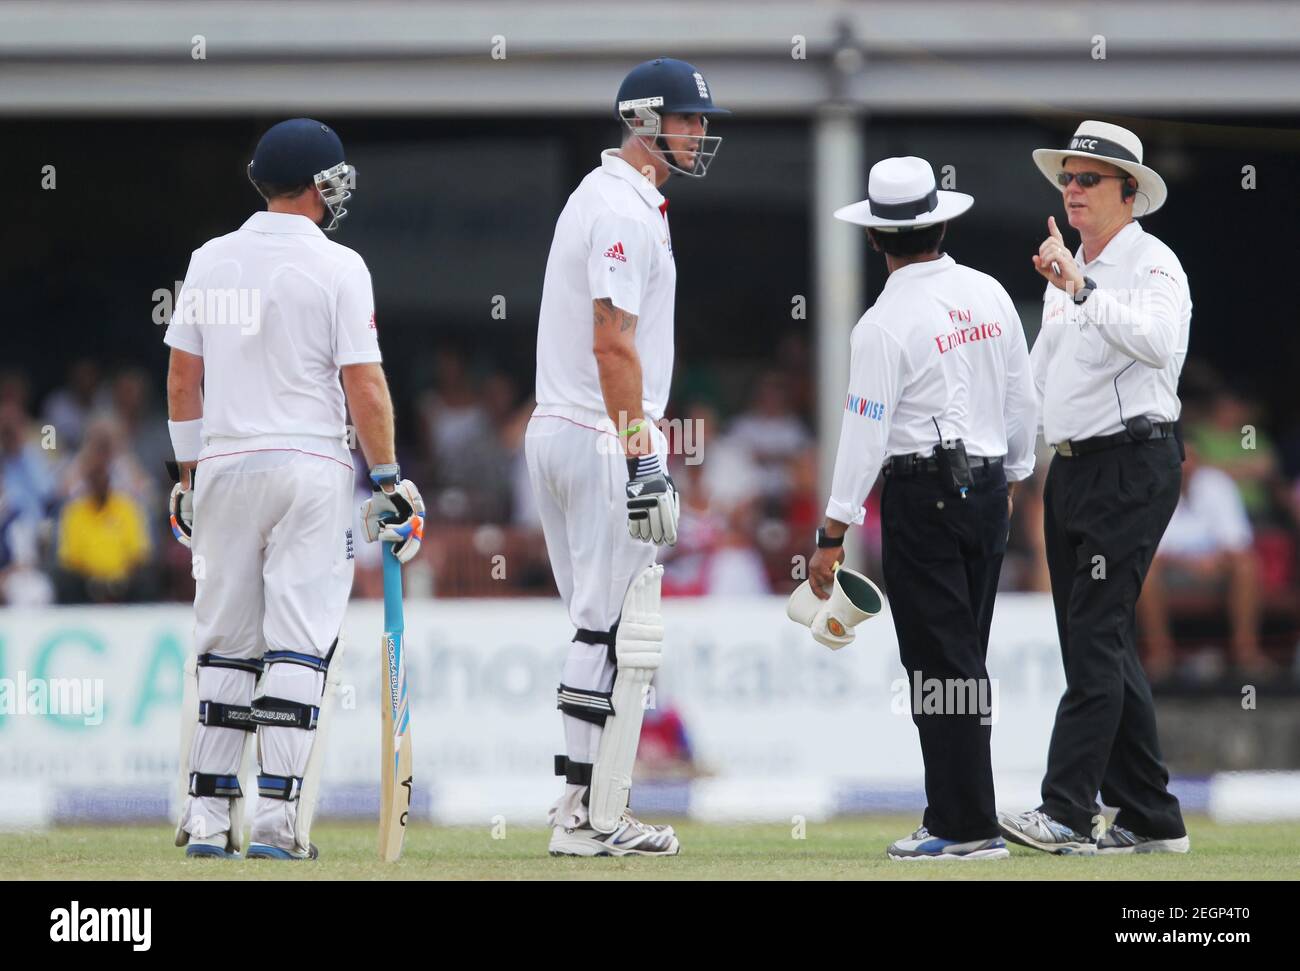 Cricket -  Sri Lanka v England 2nd Test Match - P Sara Oval, Colombo, Sri Lanka - 5/4/12  England's Kevin Pietersen (C) receives a warning from Umpire's Asad Rauf and Bruce Oxenford (R)  Mandatory Credit: Action Images / Jason O'Brien  Livepic Stock Photo